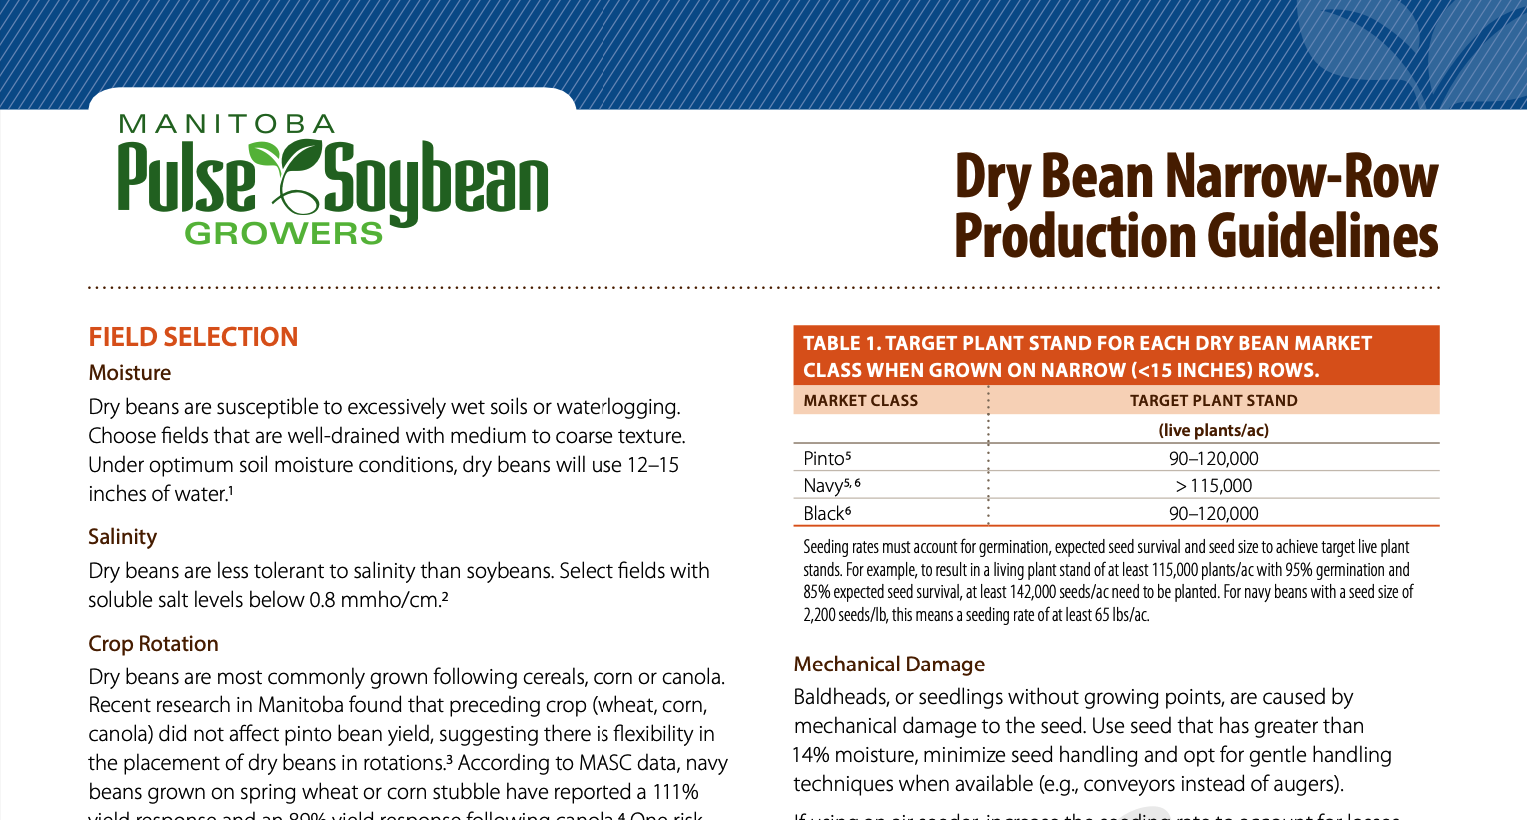 Dry Bean Narrow-Row Production Guidelines